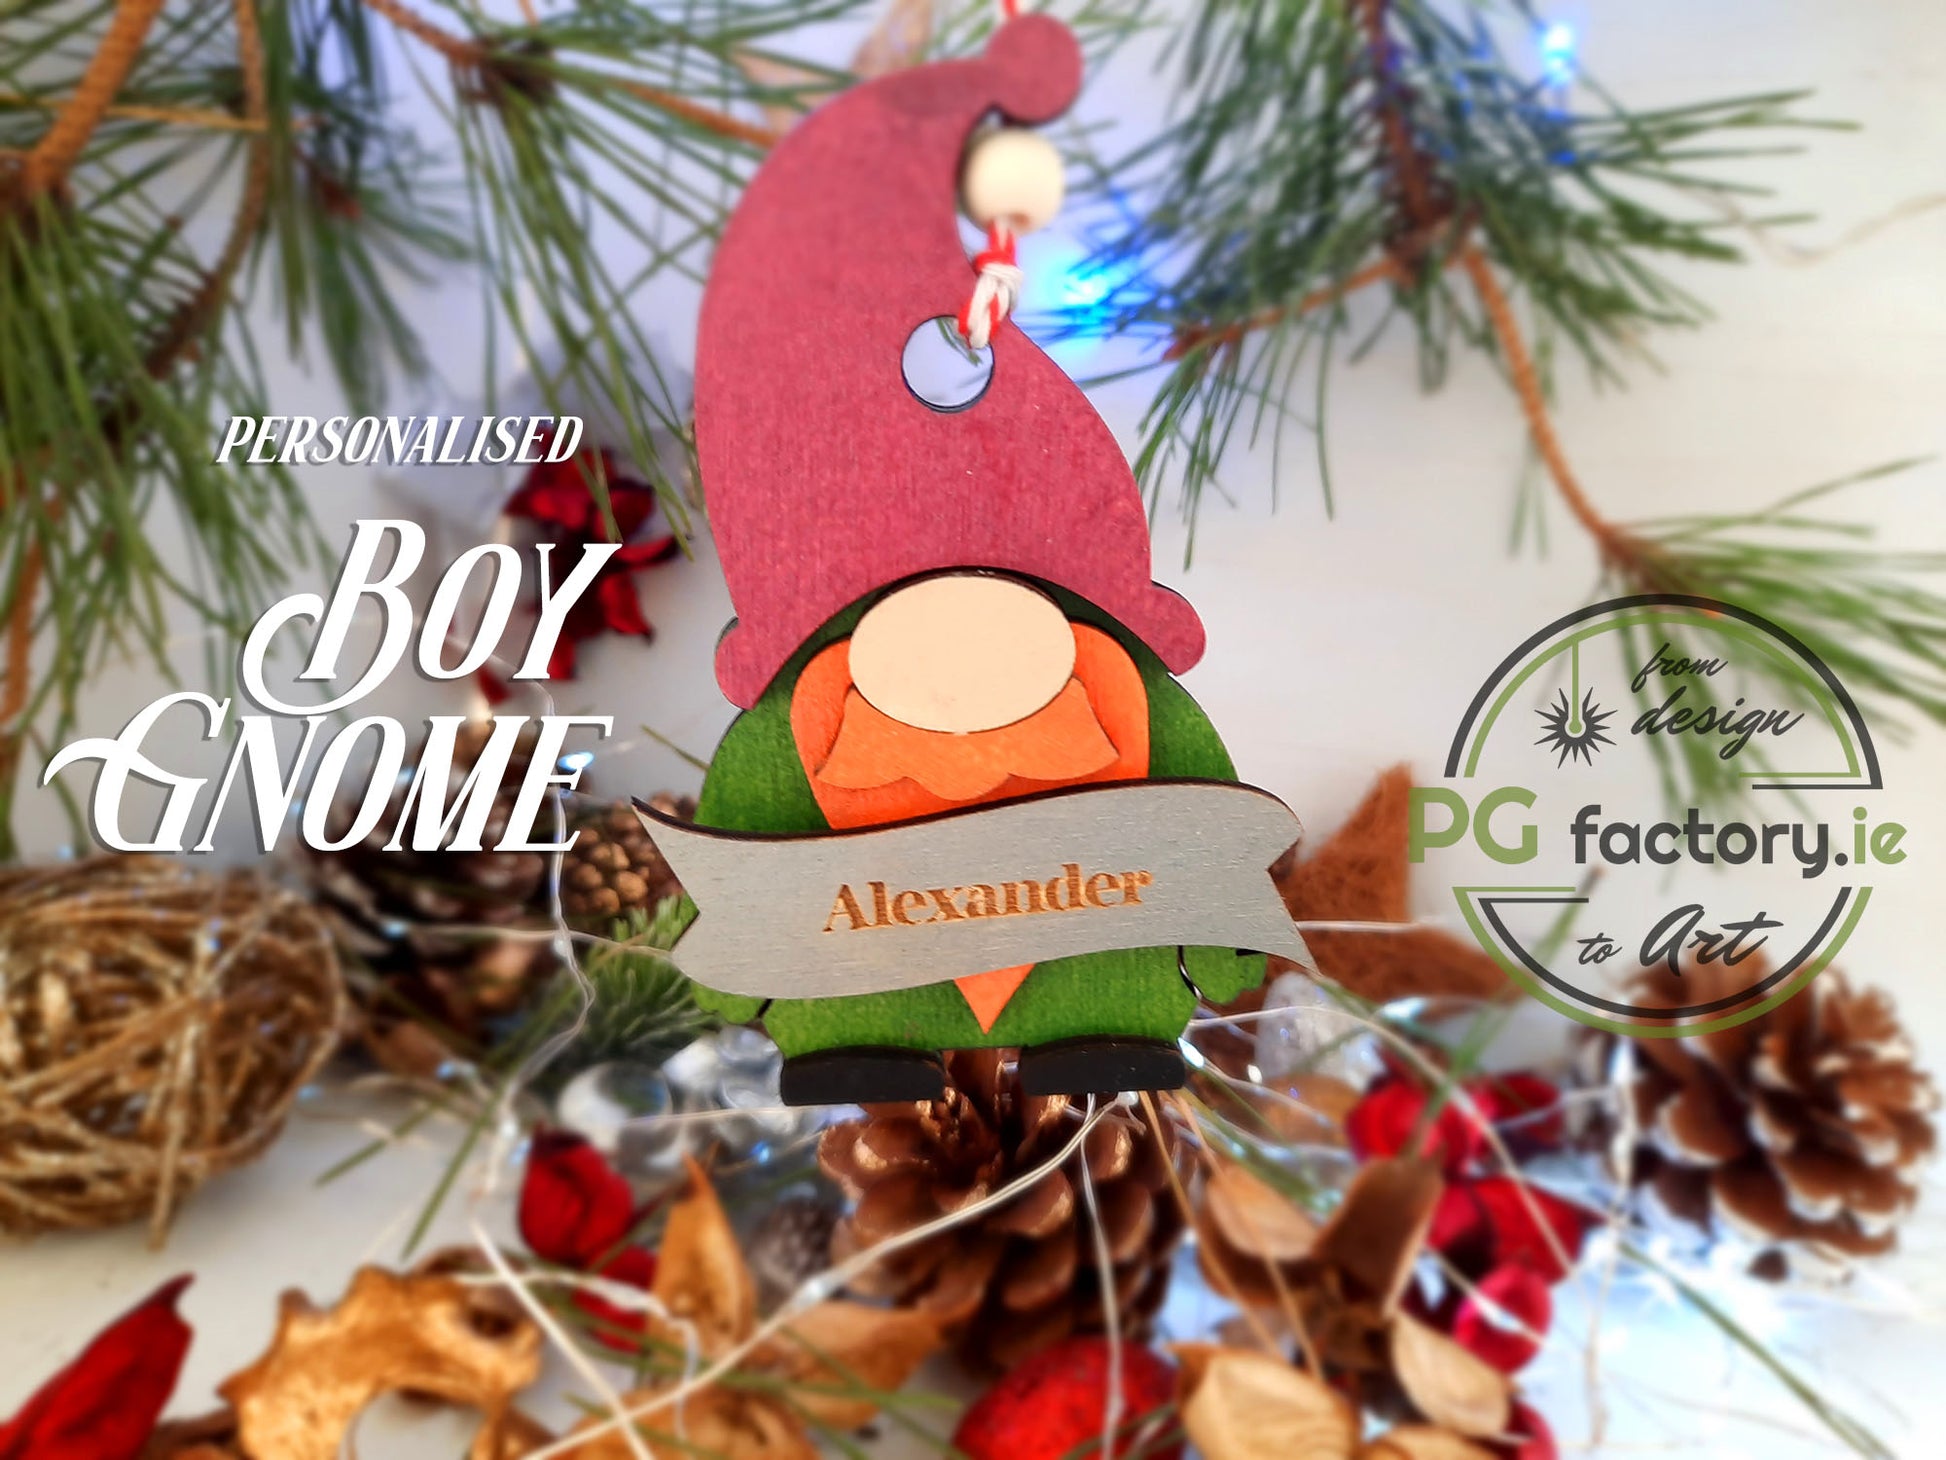 Boy Gnome - Personalised Christmas tree decoration - PG Factory